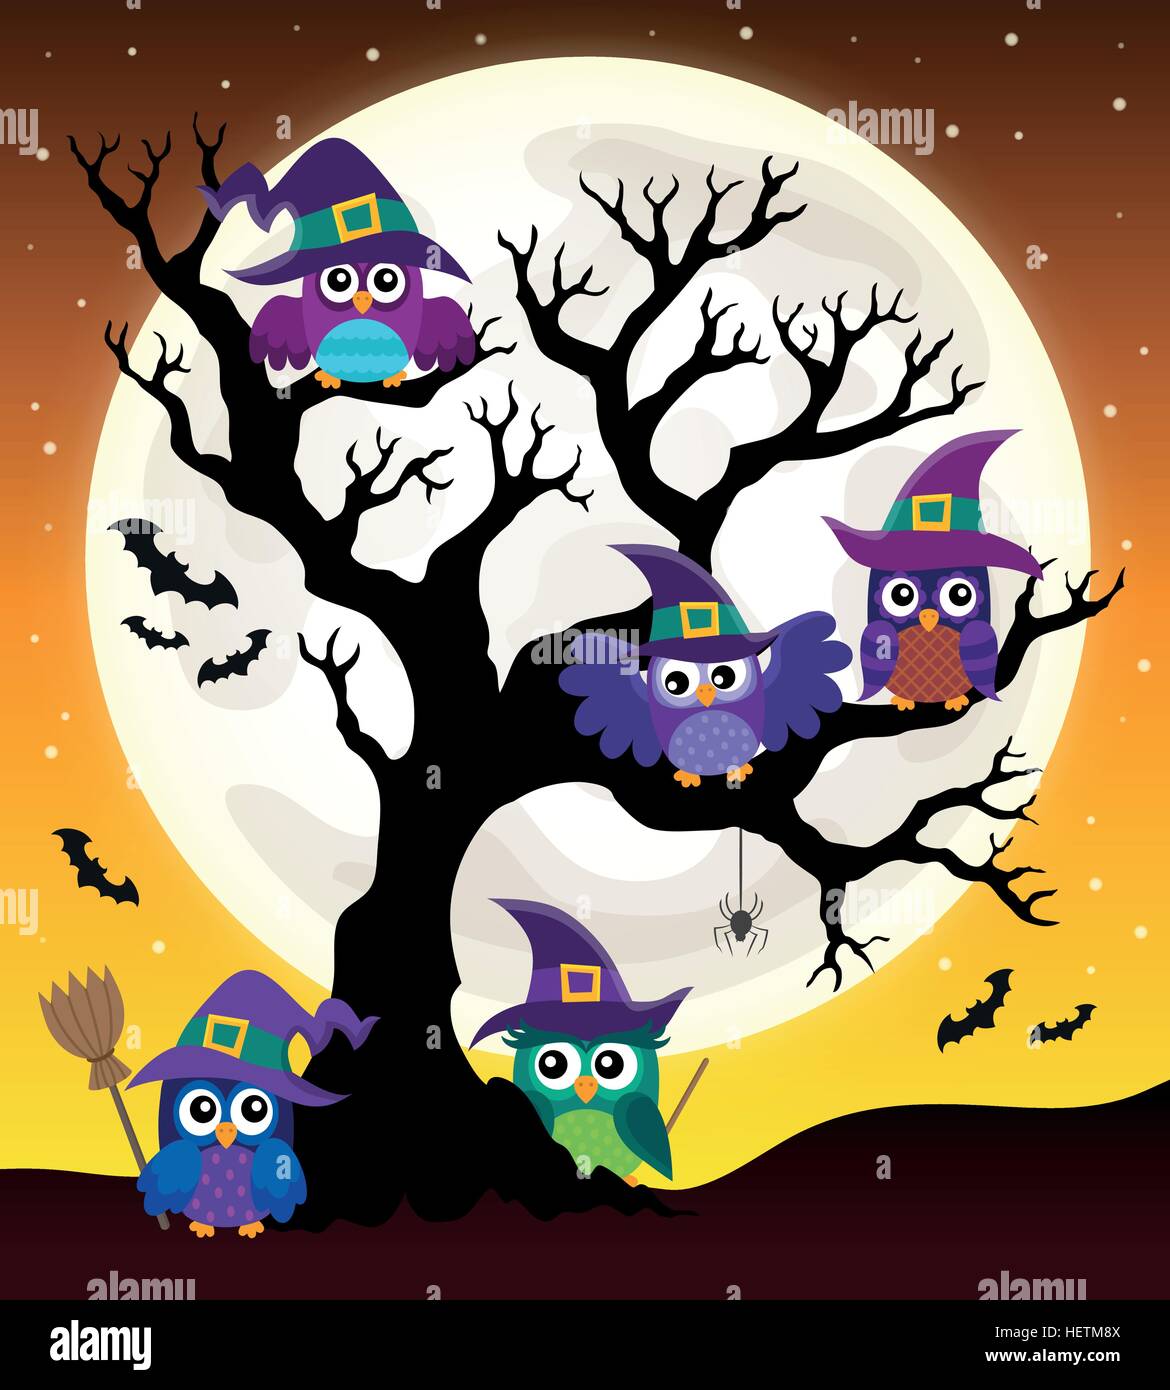 Owl witches theme image 4 - eps10 vector illustration. Stock Vector